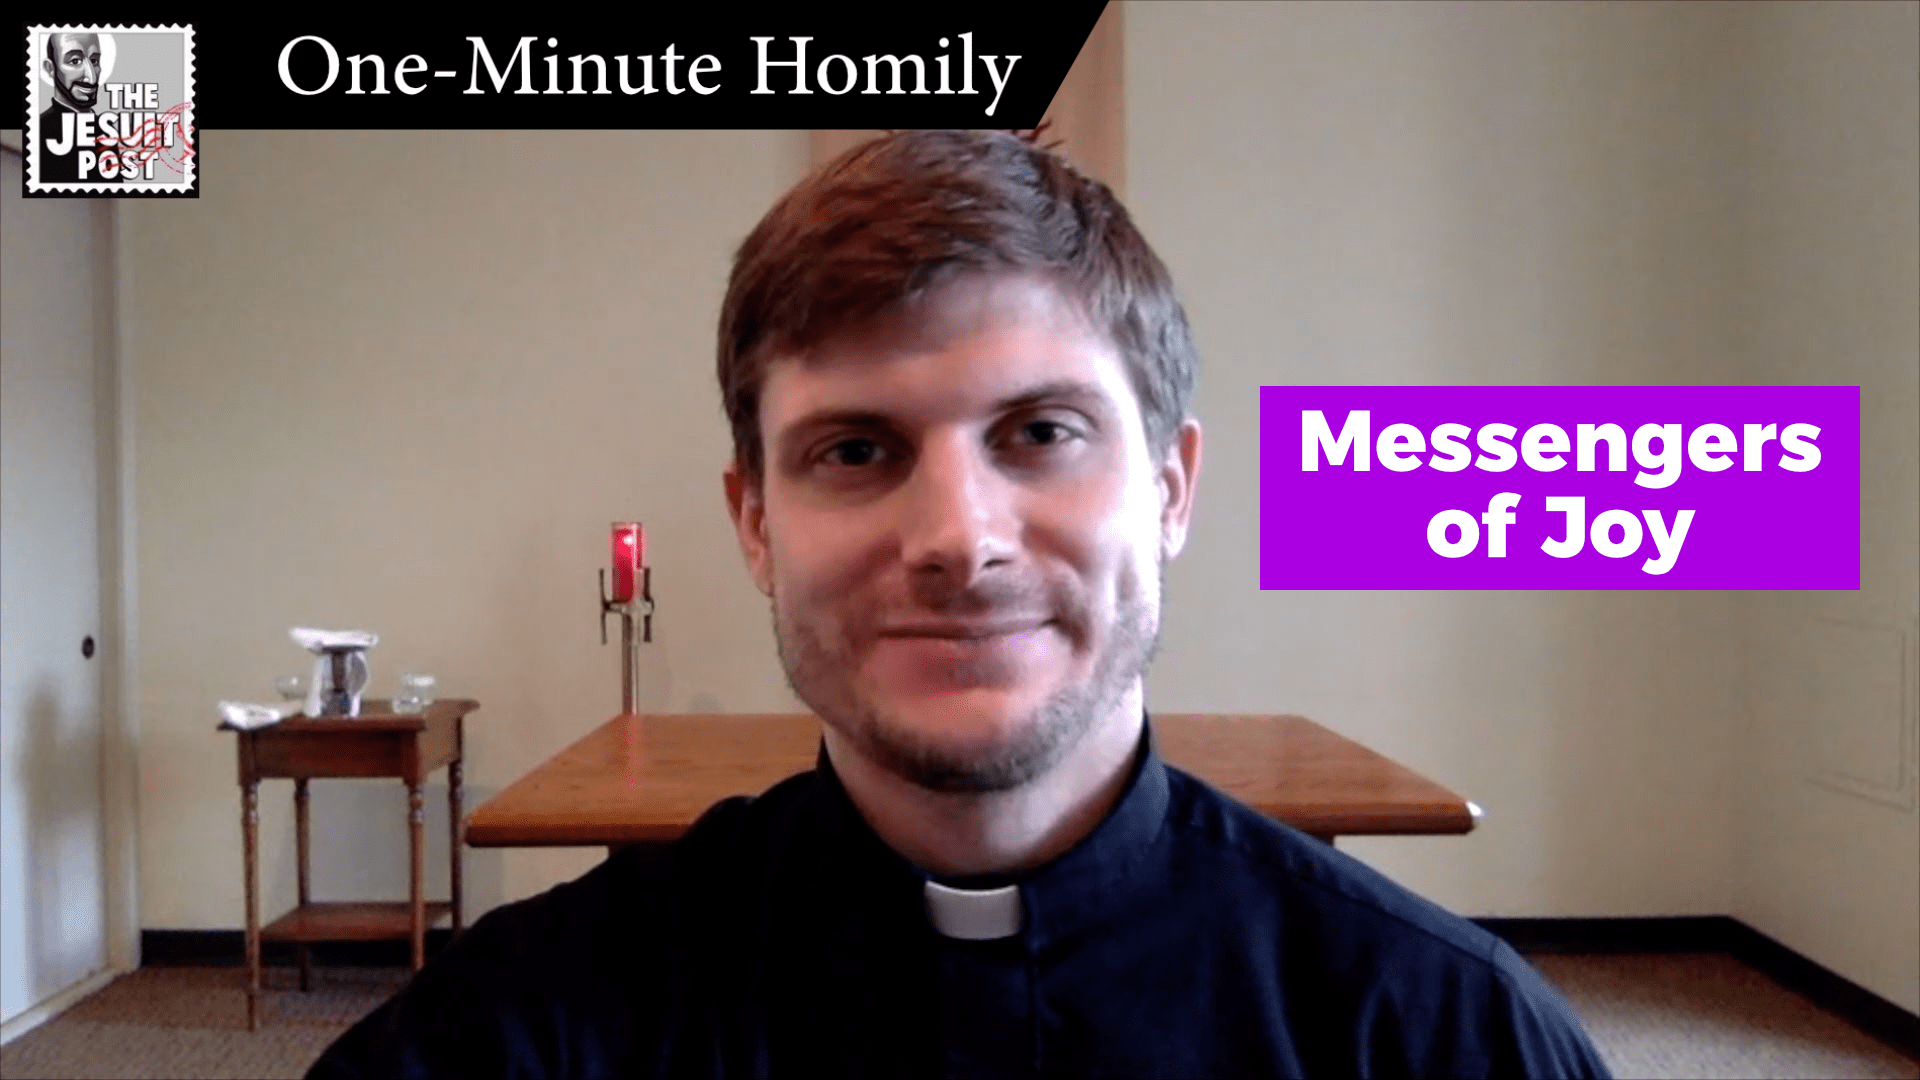 One-Minute Homily: “Messengers of Joy”